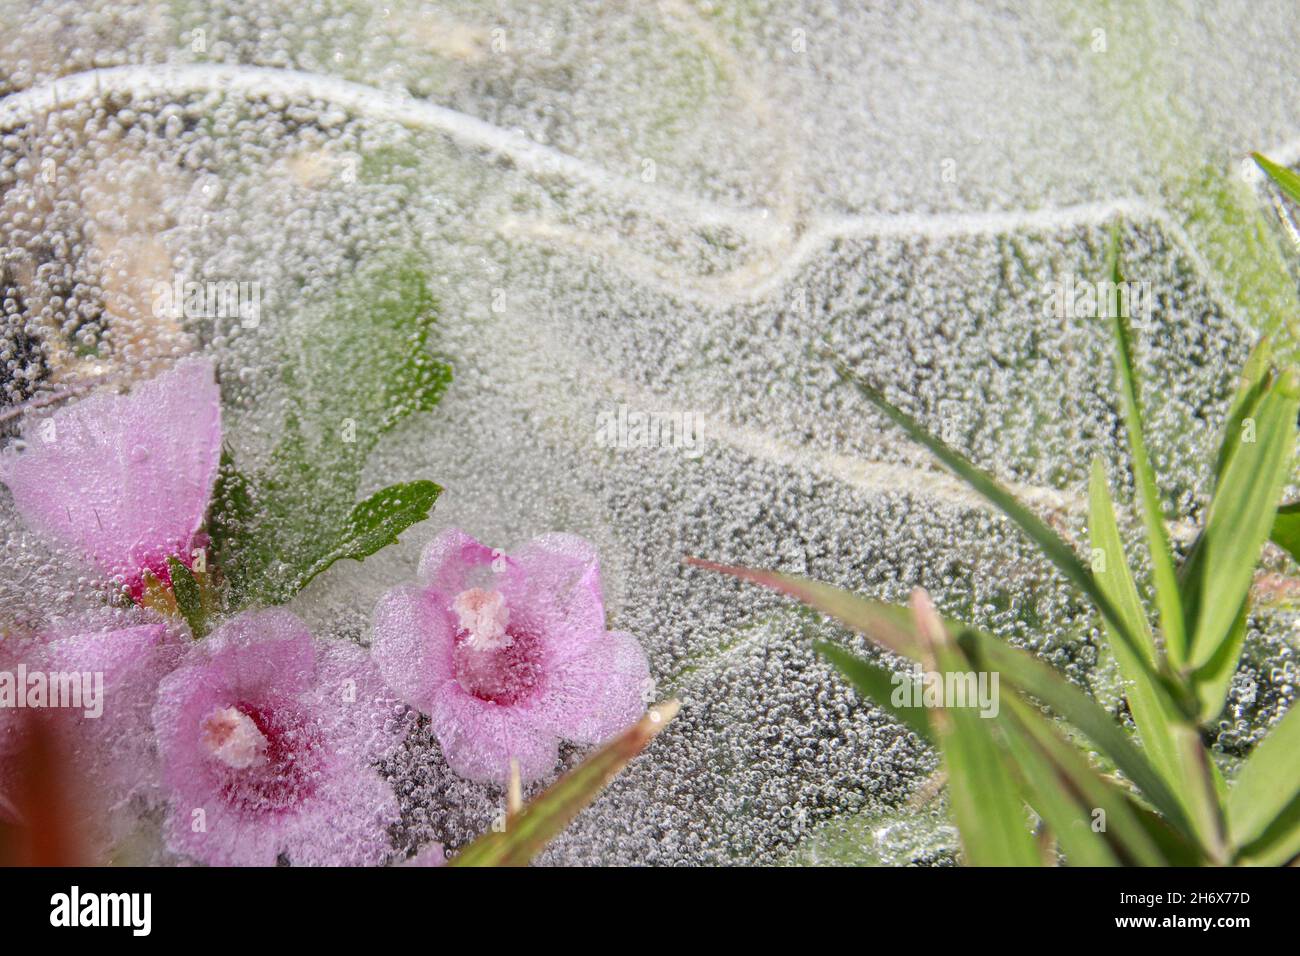 Pink flowers icebound in the thawing ice showing the concept of Winter giving way to Spring or Seasonal Switch Stock Photo